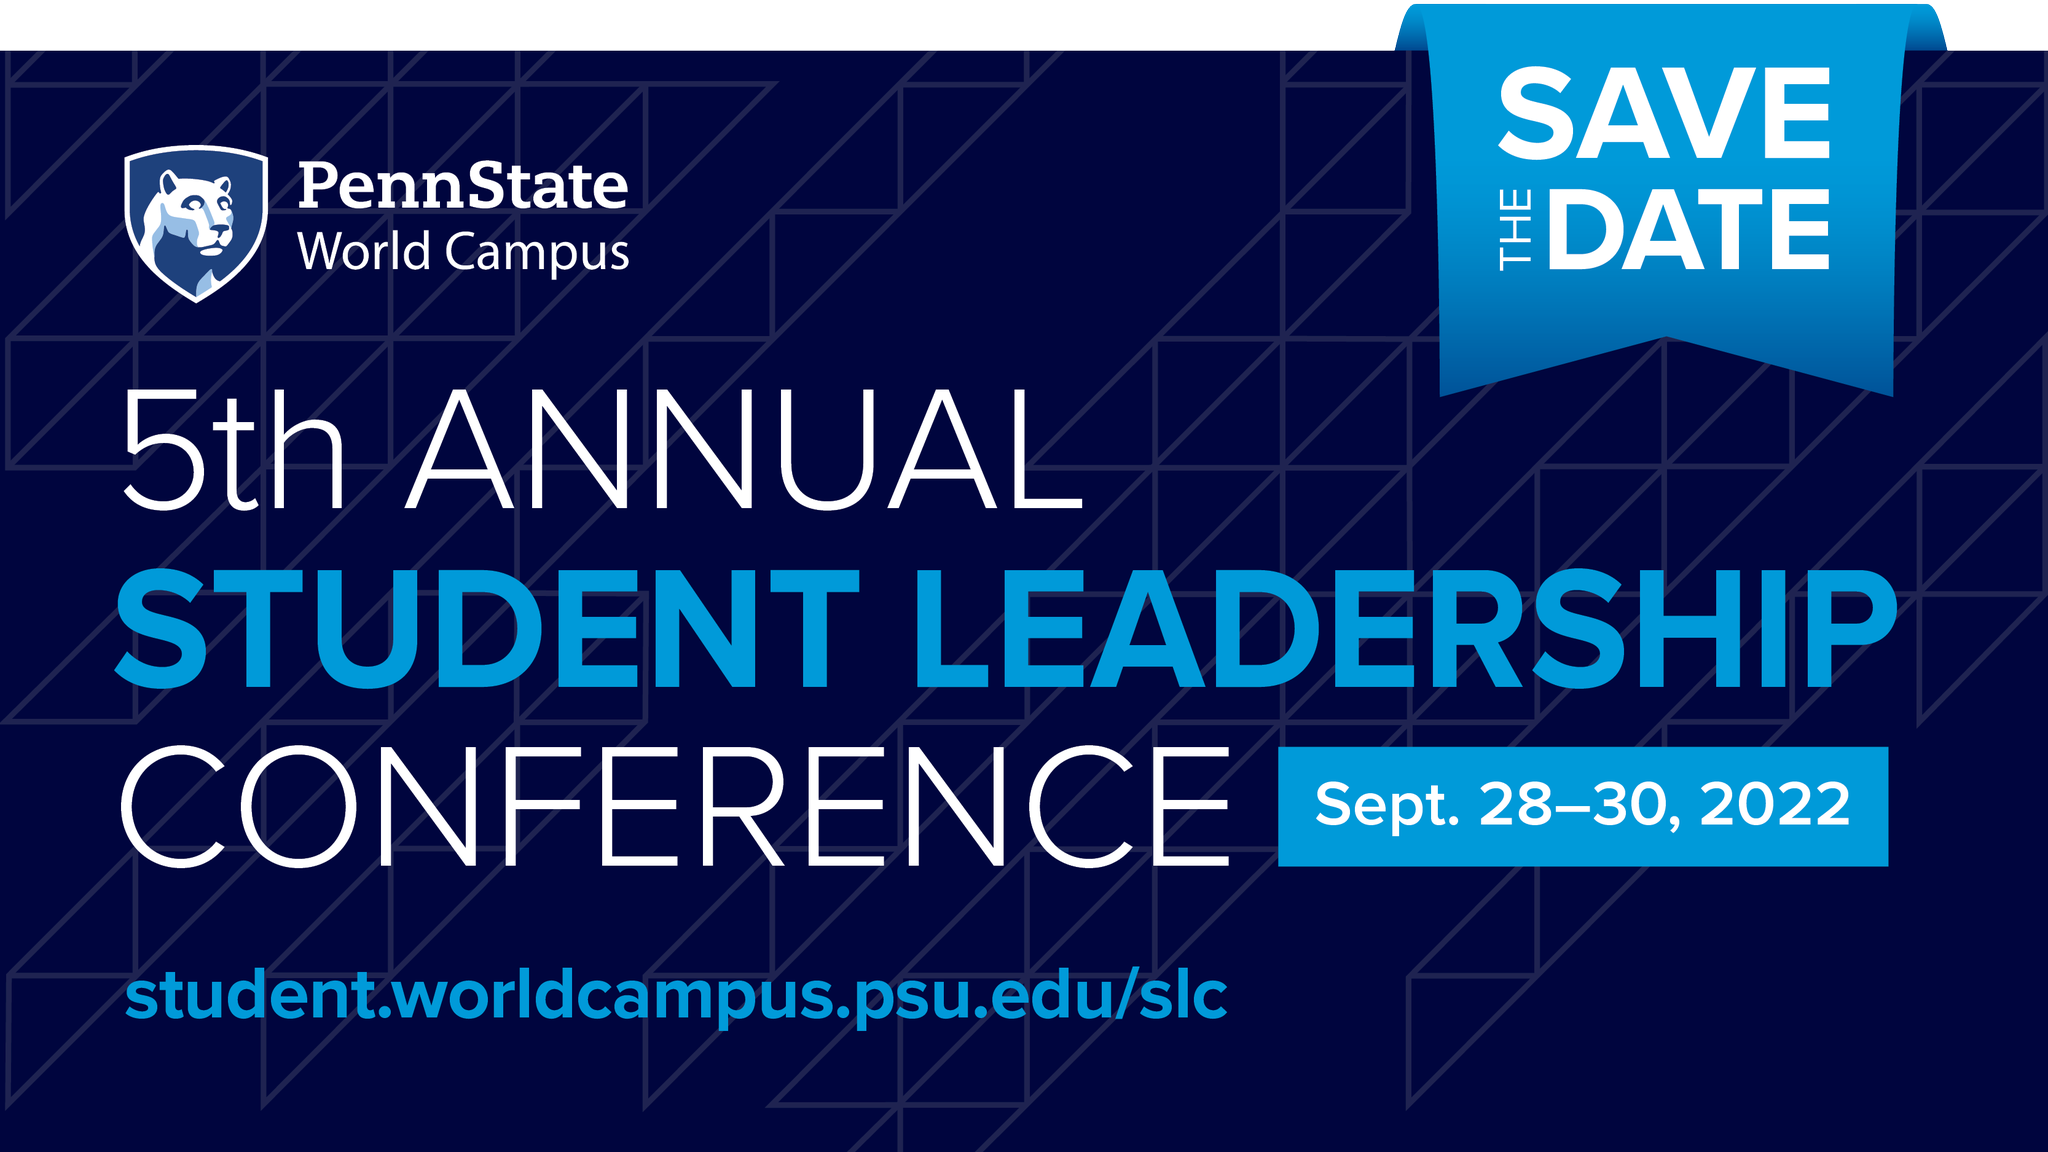 penn-state-world-campus-on-twitter-save-the-date-for-this-year-s-pennstateworldcampus-student